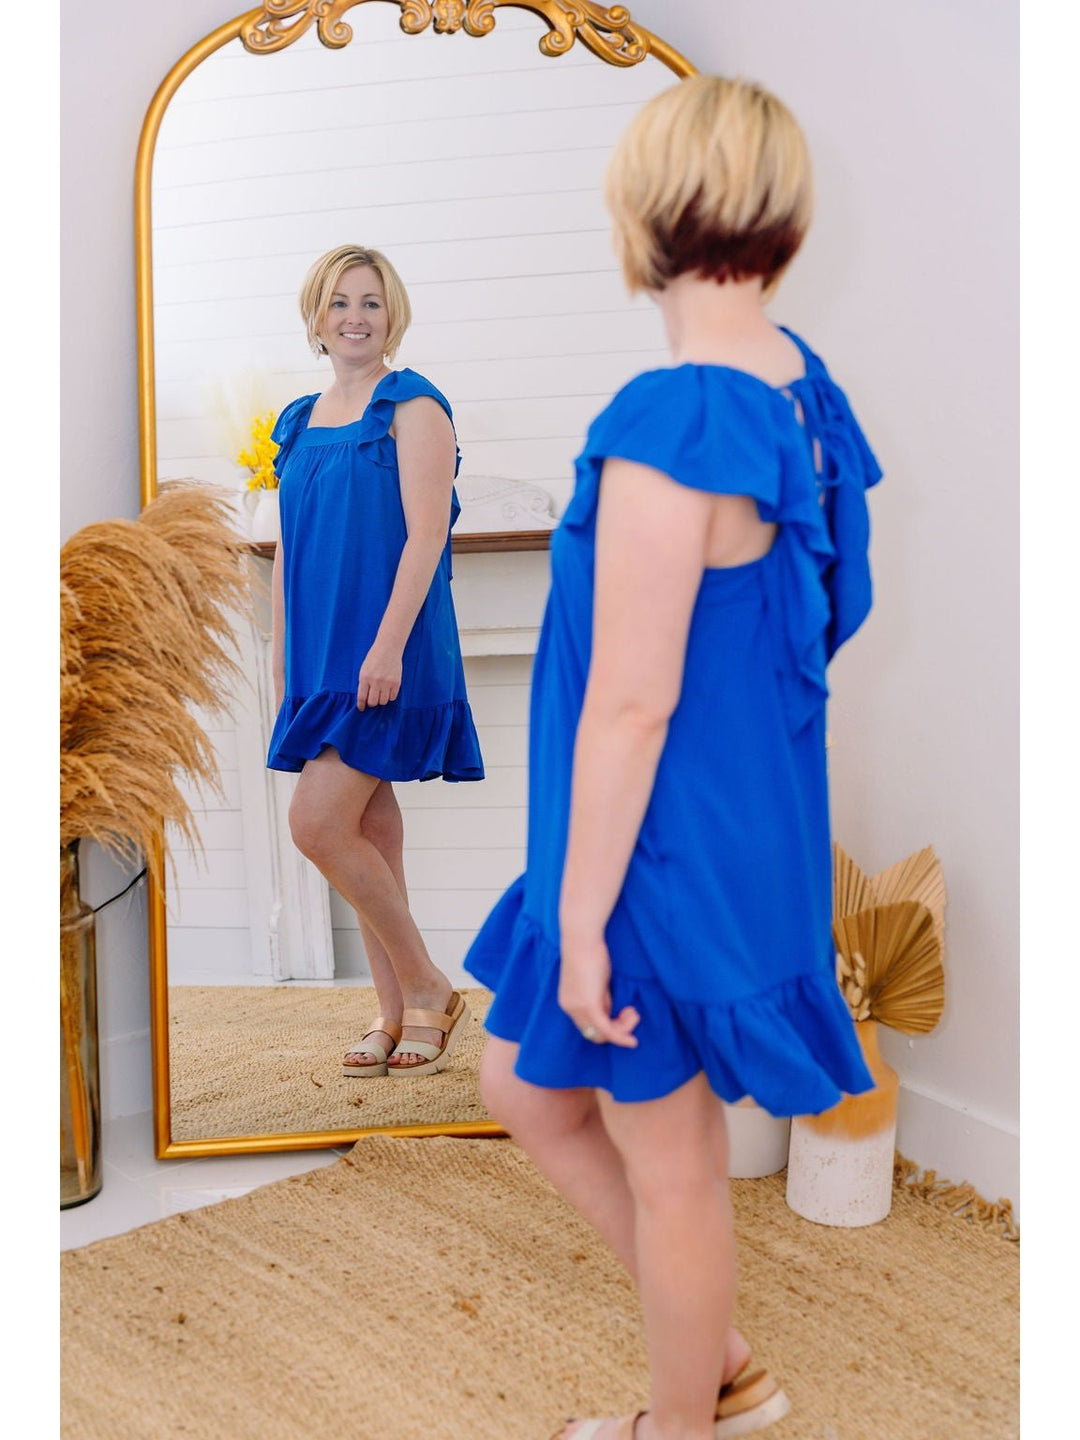 Blue Sleeveless Dress with Flutter Sleeves - Lolo Viv Boutique